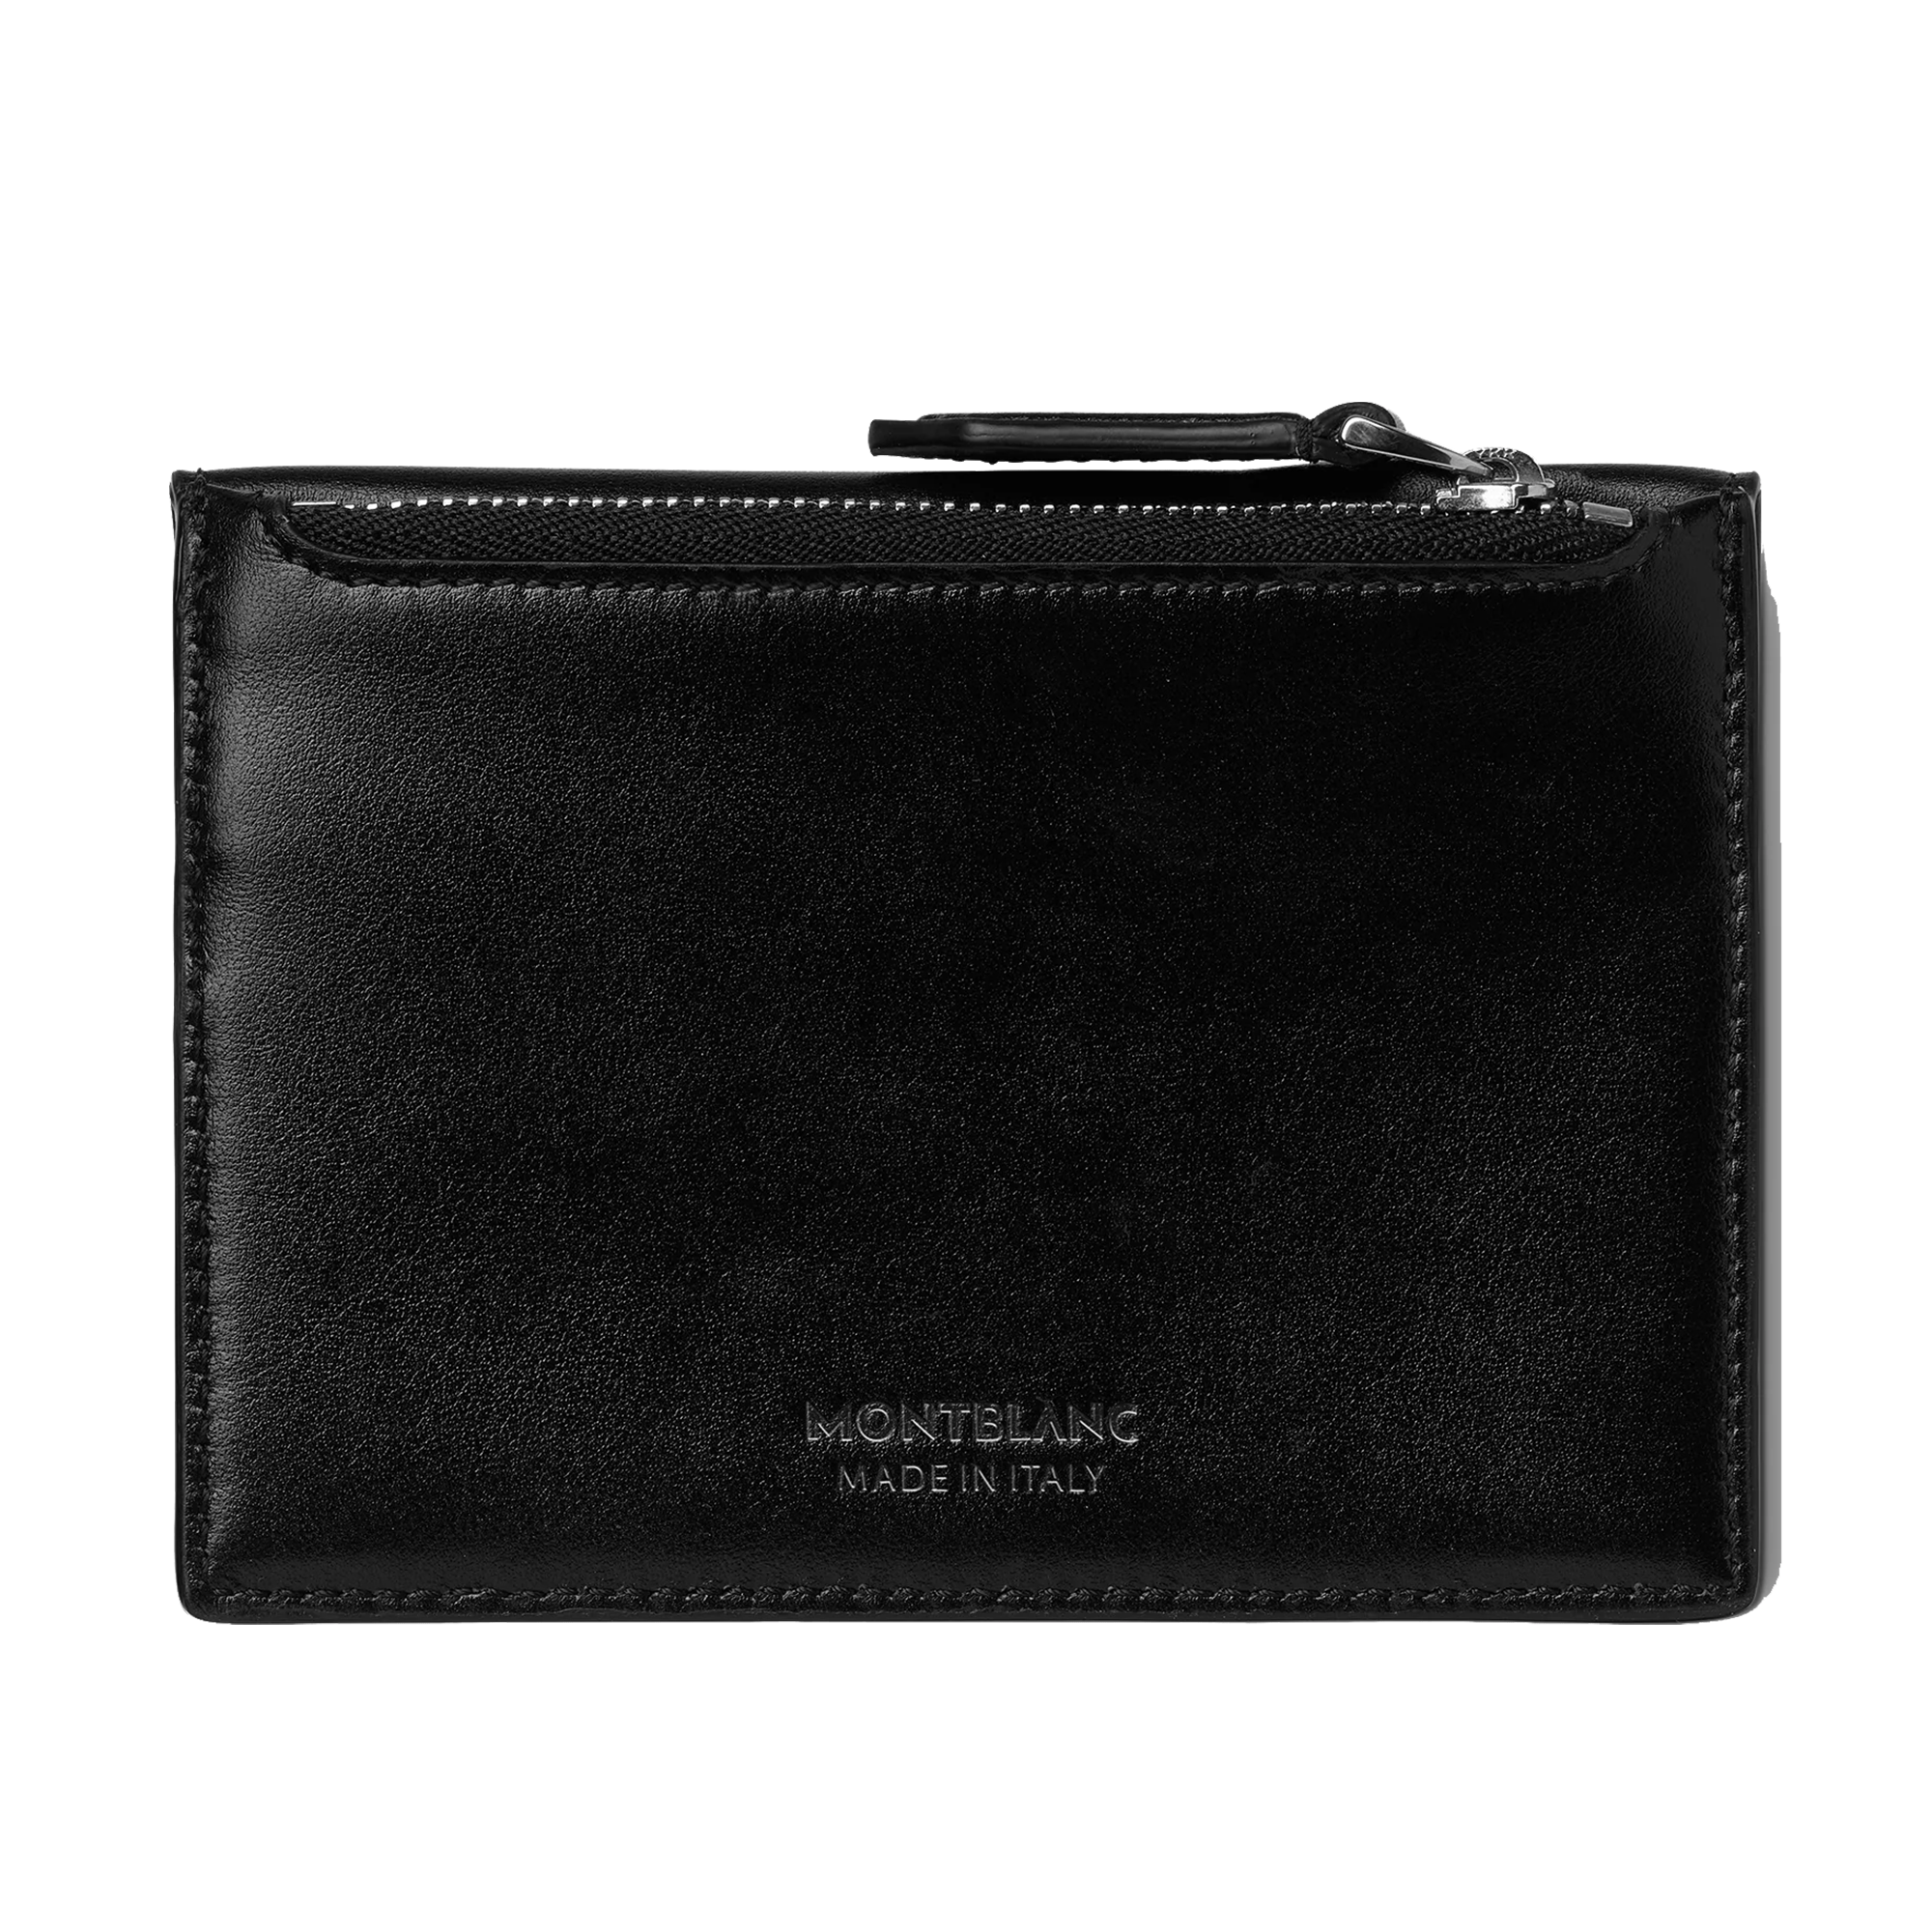 Meisterstuck Zipped Card Holder in Black Leather